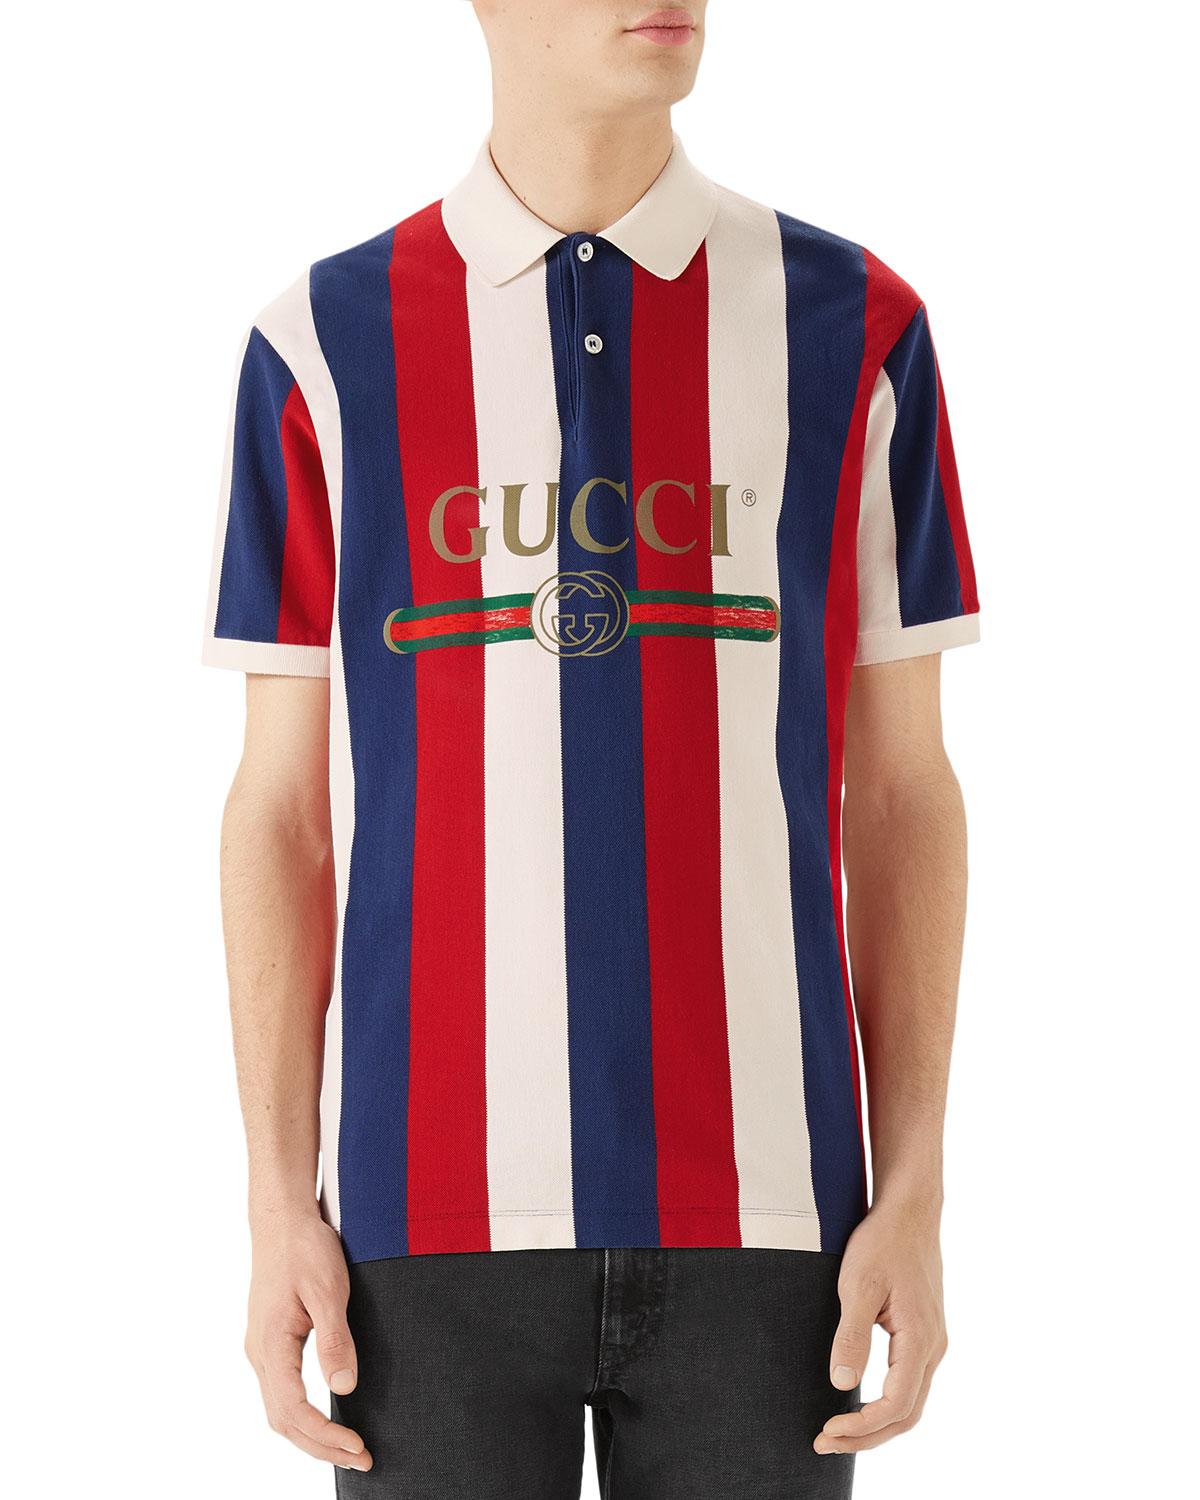 gucci stripe tee, OFF 71%,welcome to buy!